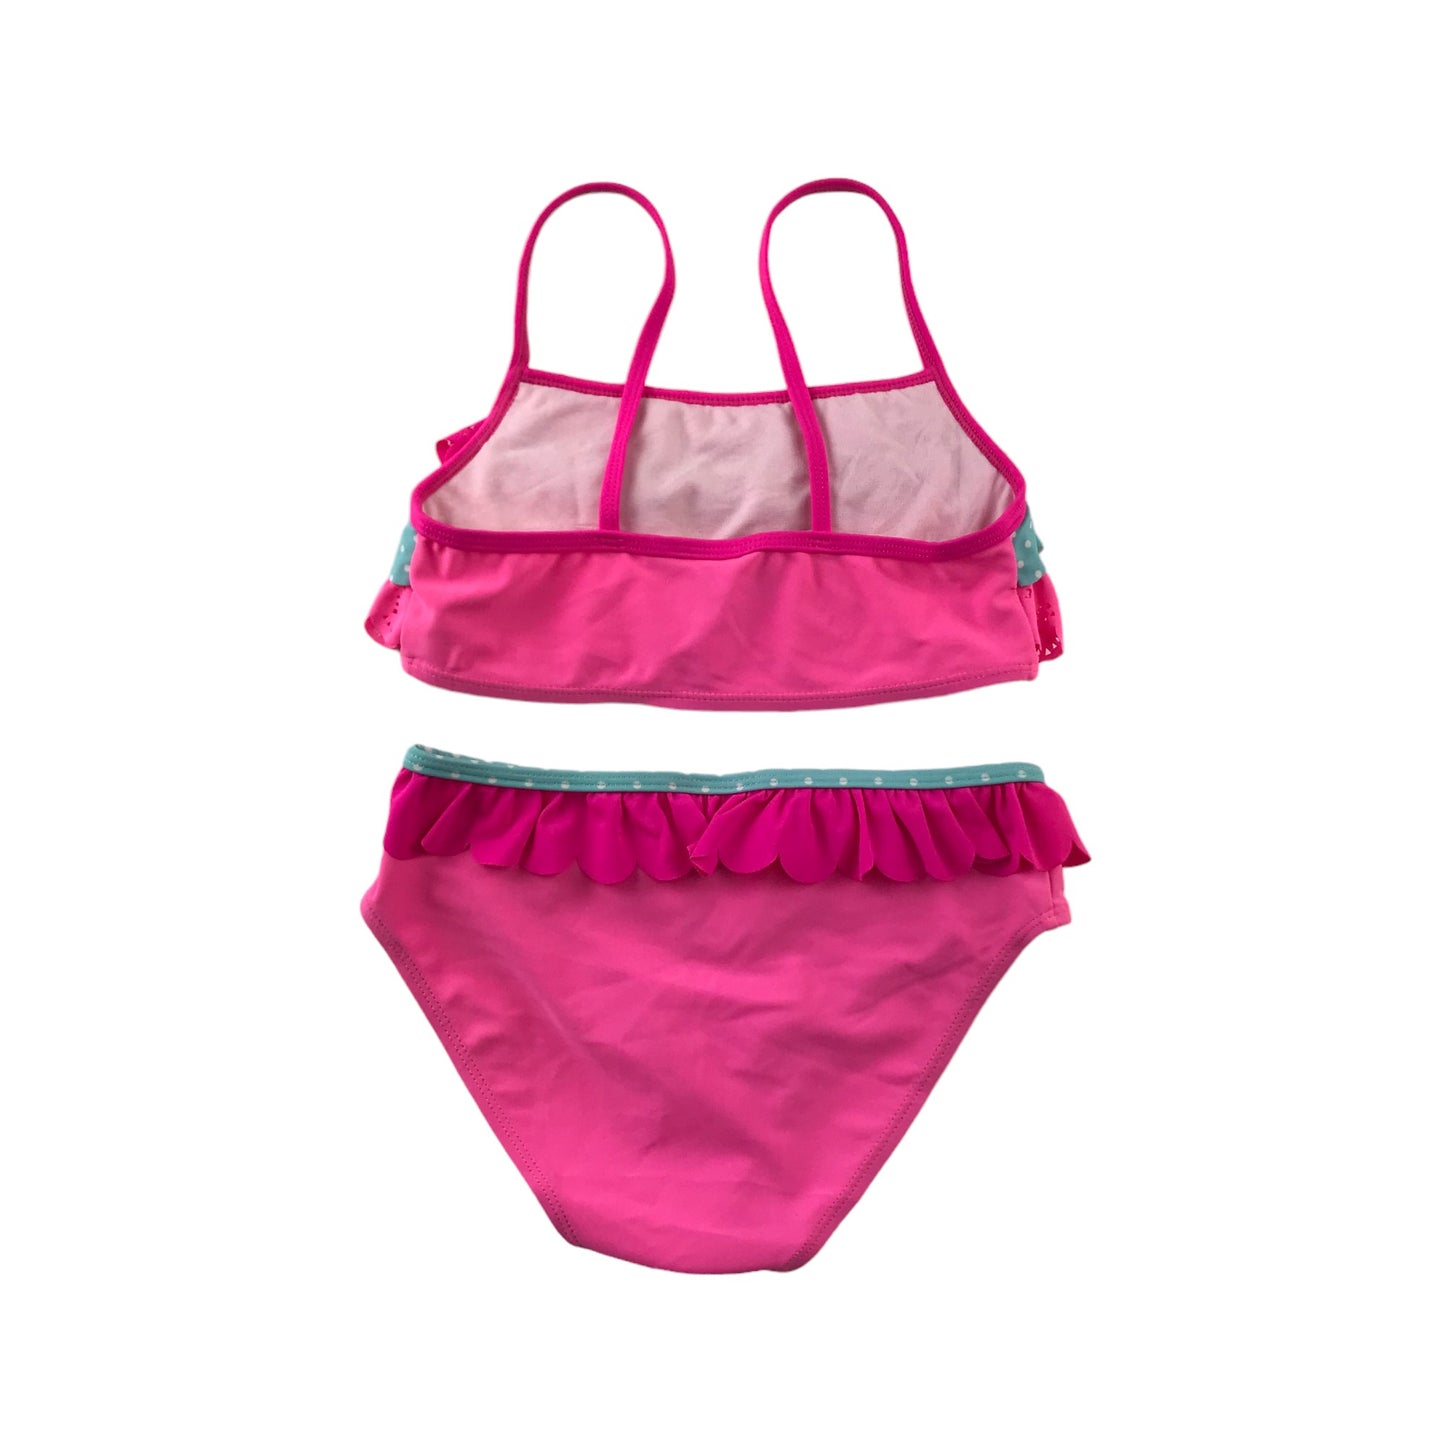 Accessorize Bikini Age 9 Pink and Blue Frilled Detail 2-Piece Set